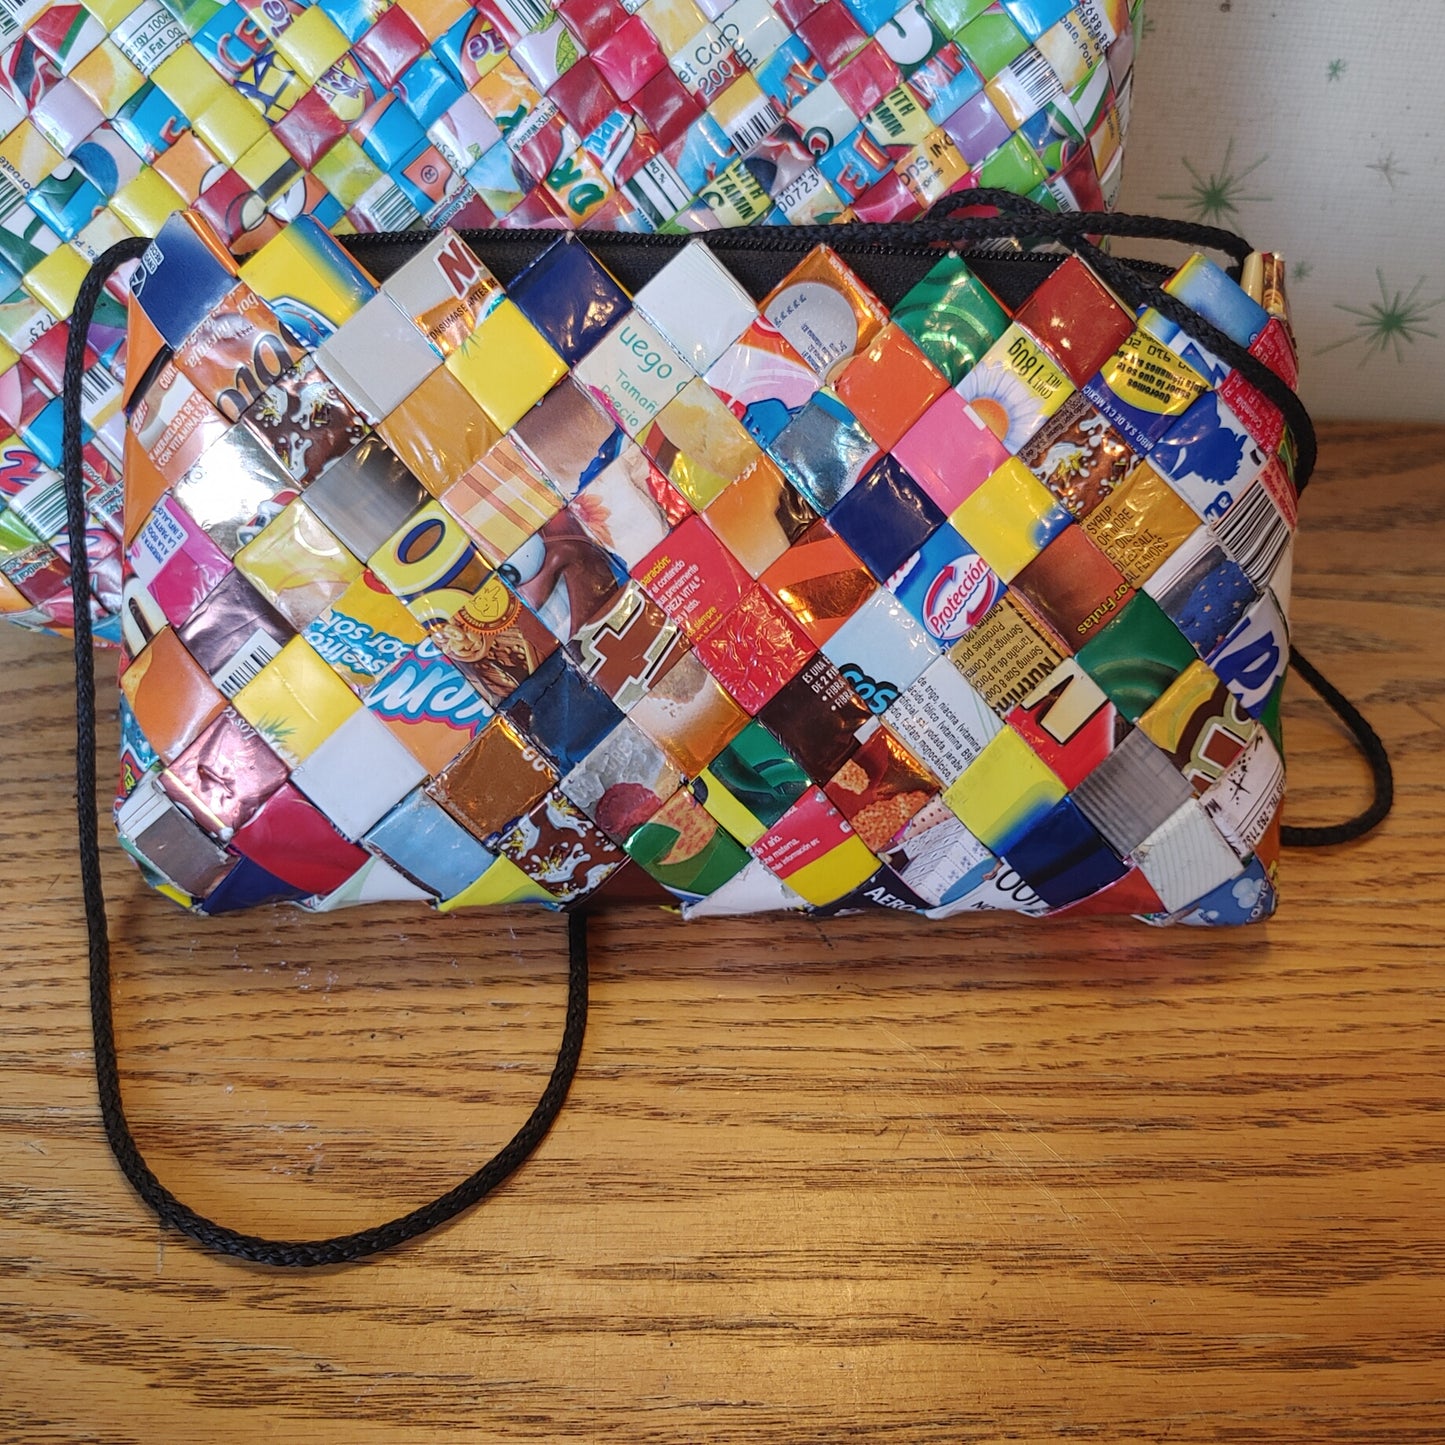 Wrapper It Up! Woven Recycled Candy Wrapper Purse Bag Clutch Tote Pair Large Artisanal Mexico